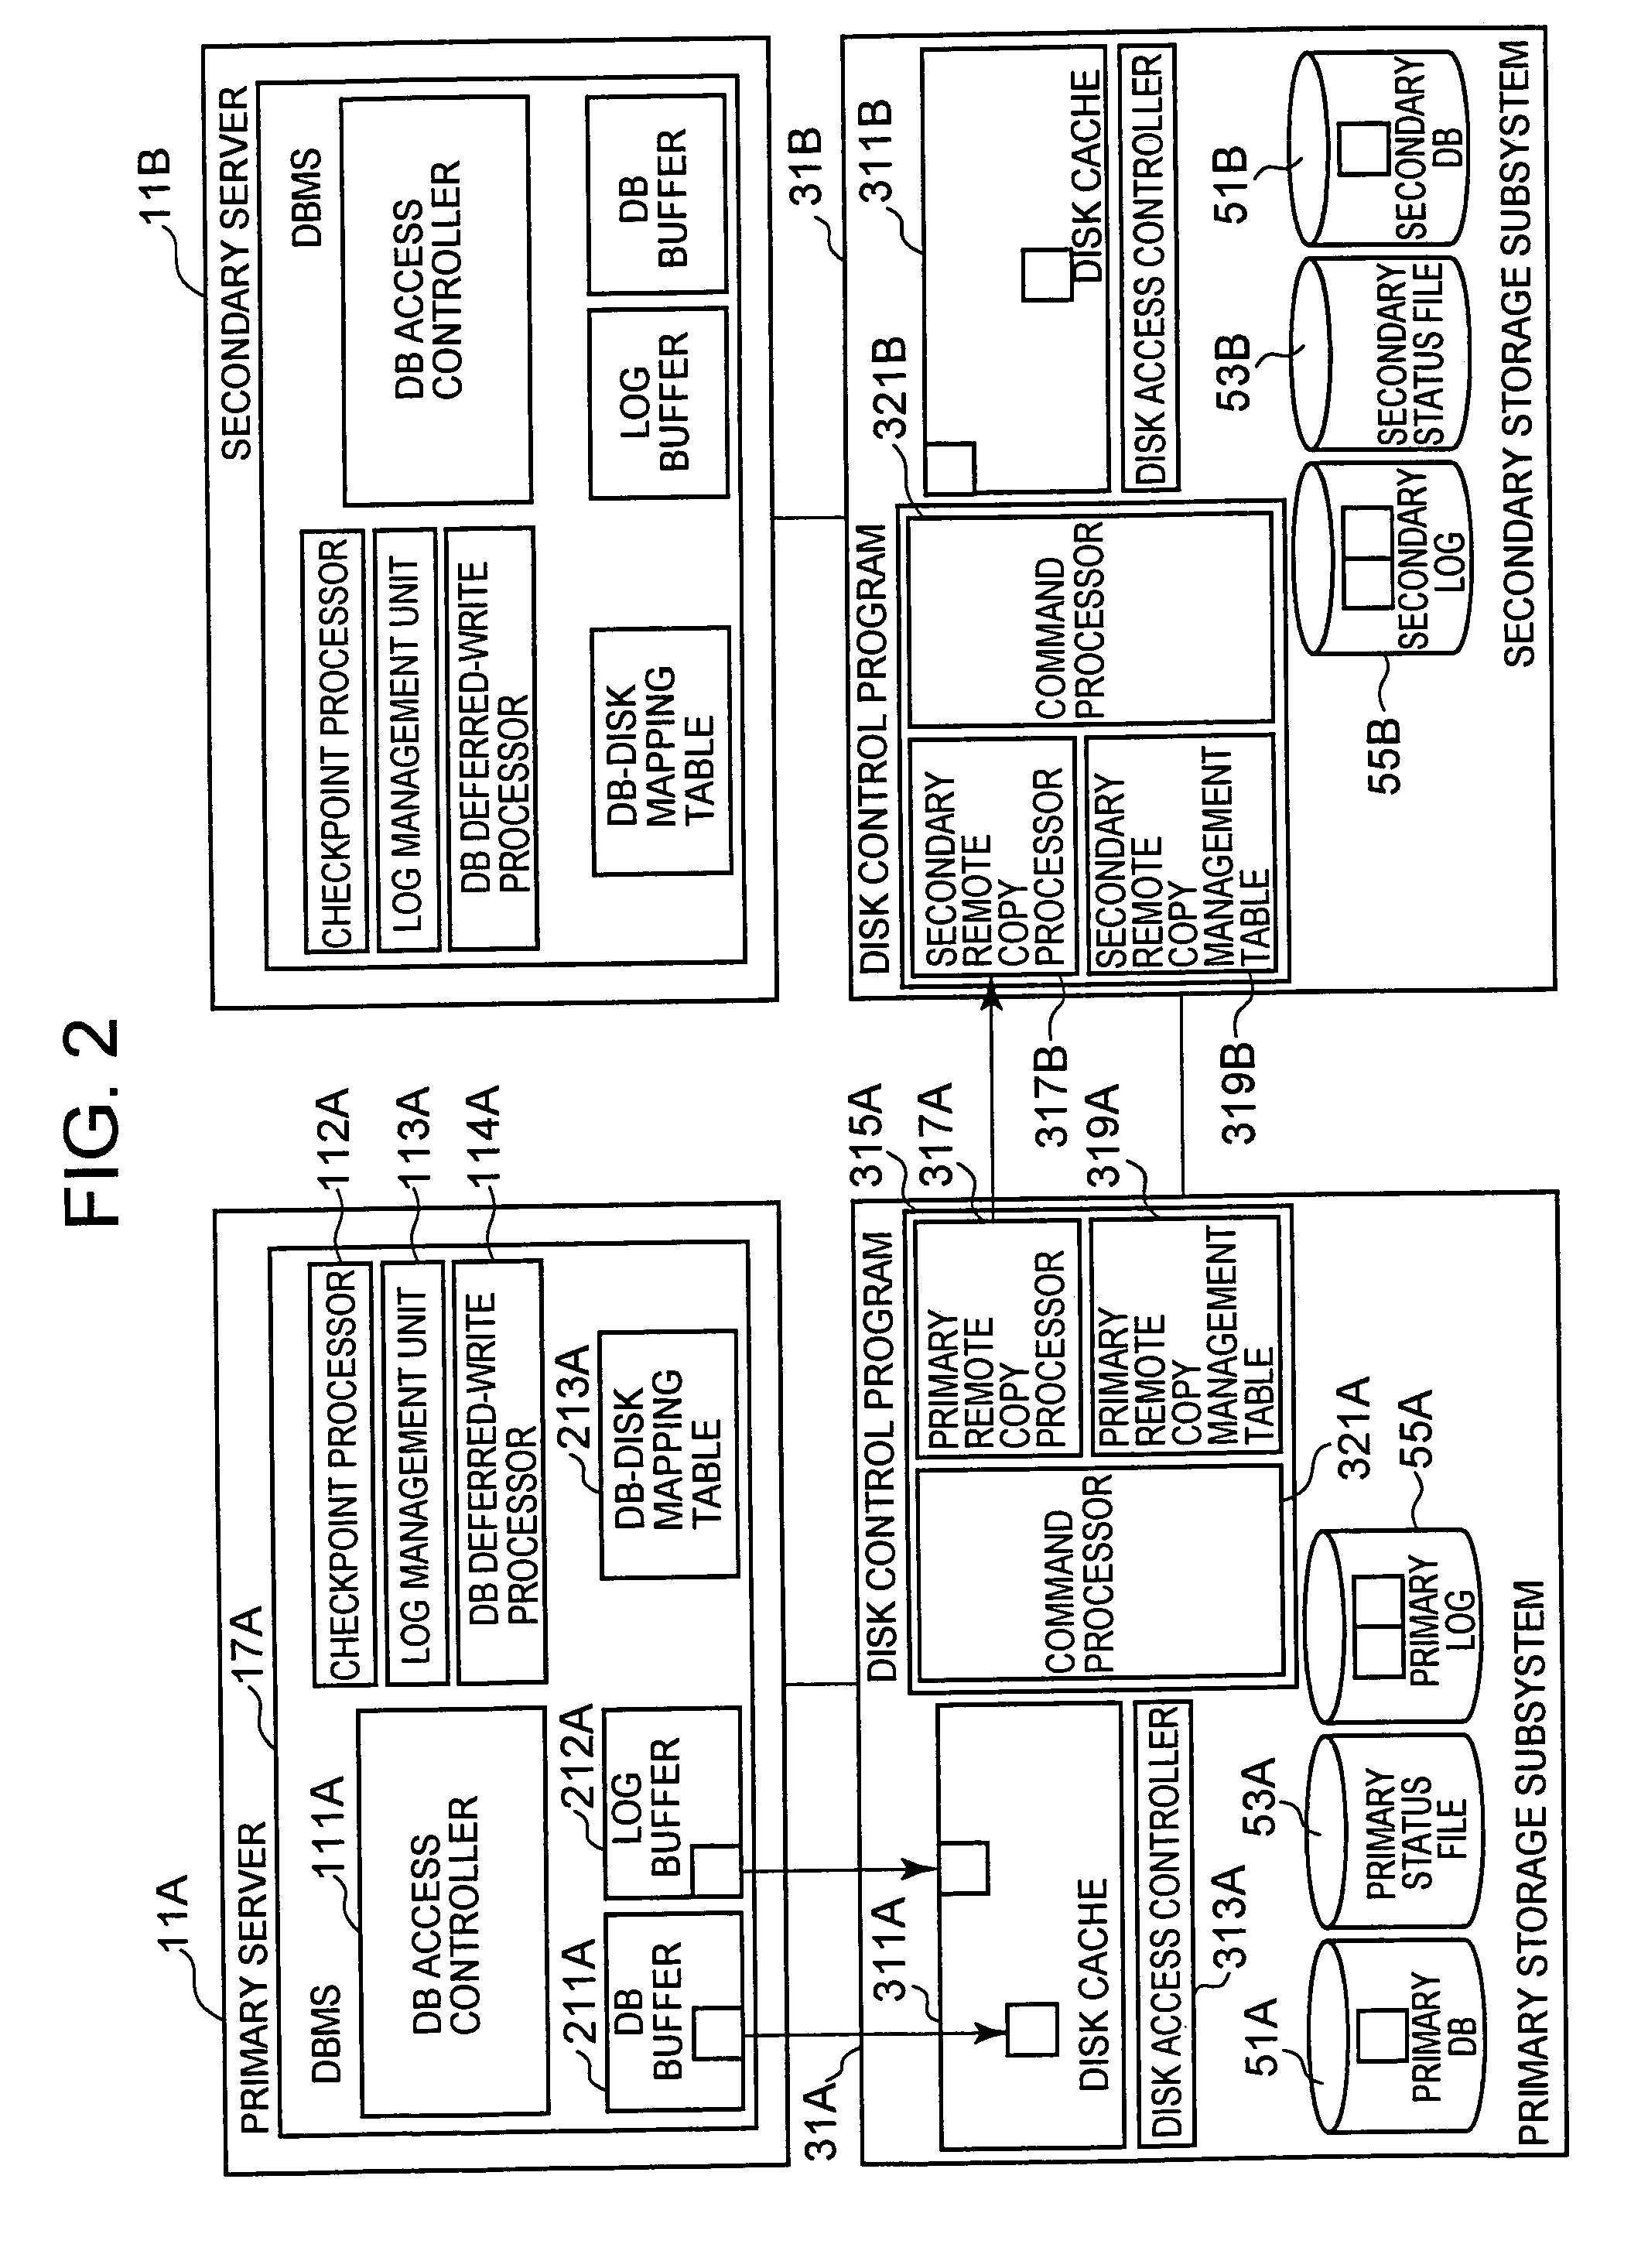 Storage control method for database recovery in logless mode